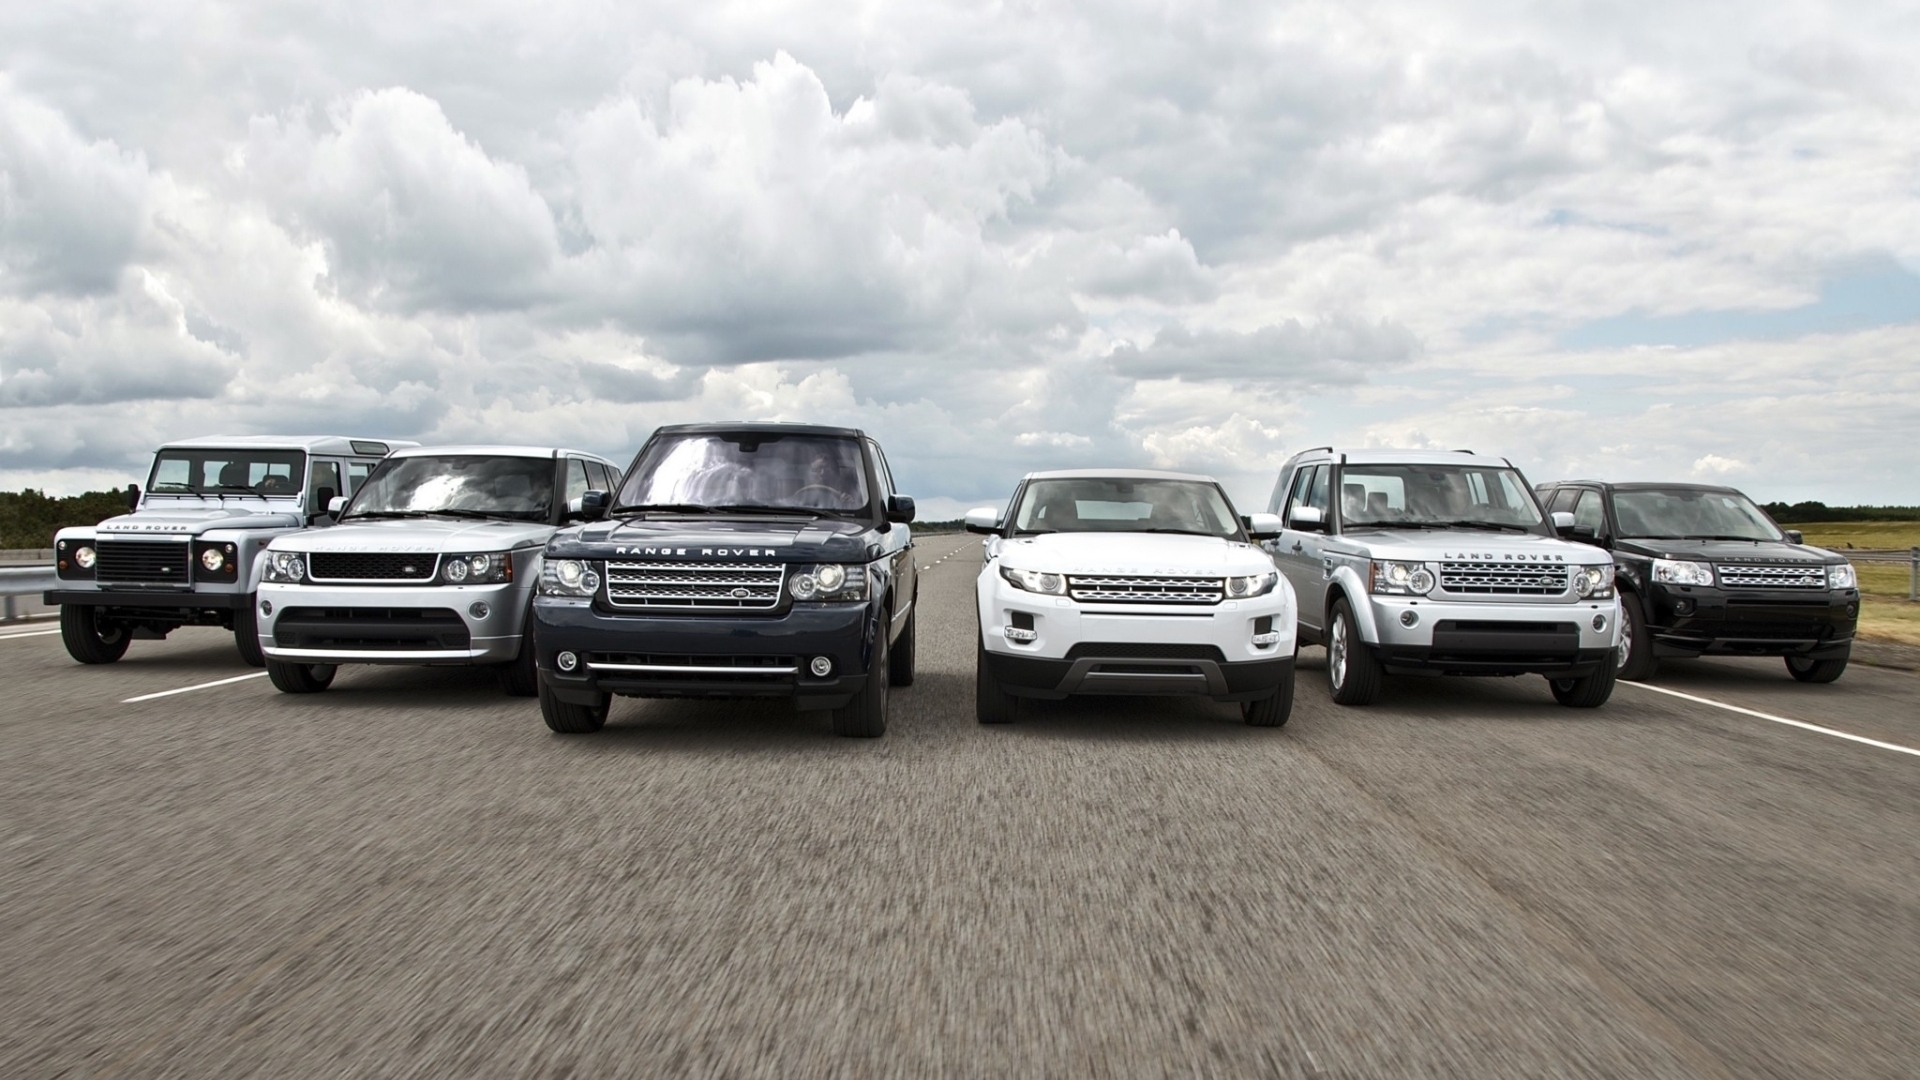 Land Rover and Range Rover for 1920 x 1080 HDTV 1080p resolution